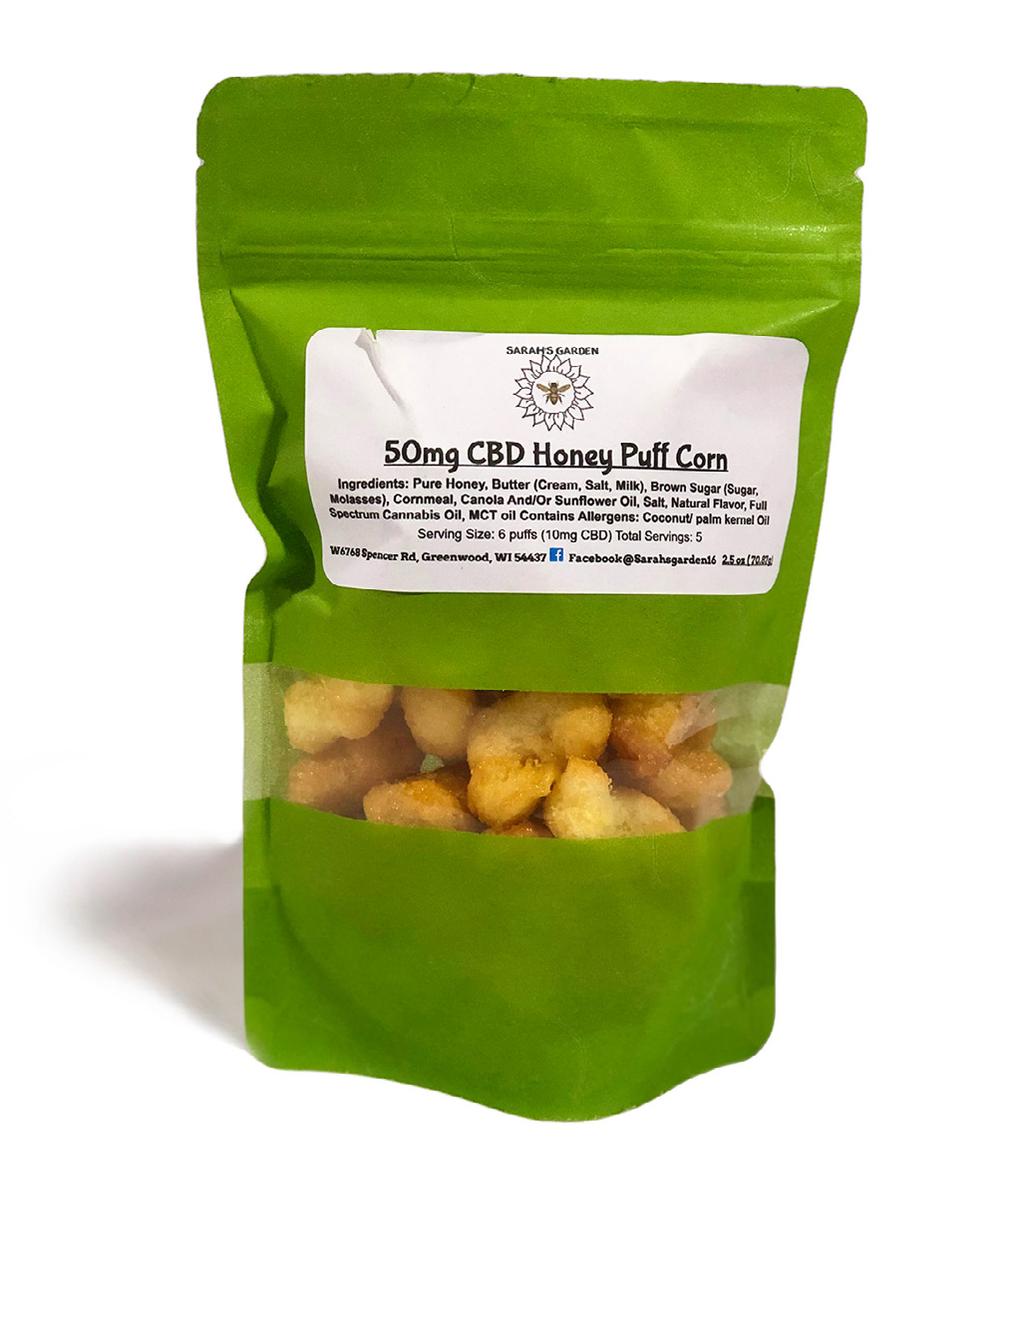 Sarah s Garden CBD Honey Puff Corn (50mg) Sarah s Garden is located in Greenwood, WI. Enjoy this tasty snack anytime of the day! Contians 5 servings, about 6 puffs (10mg CBD).